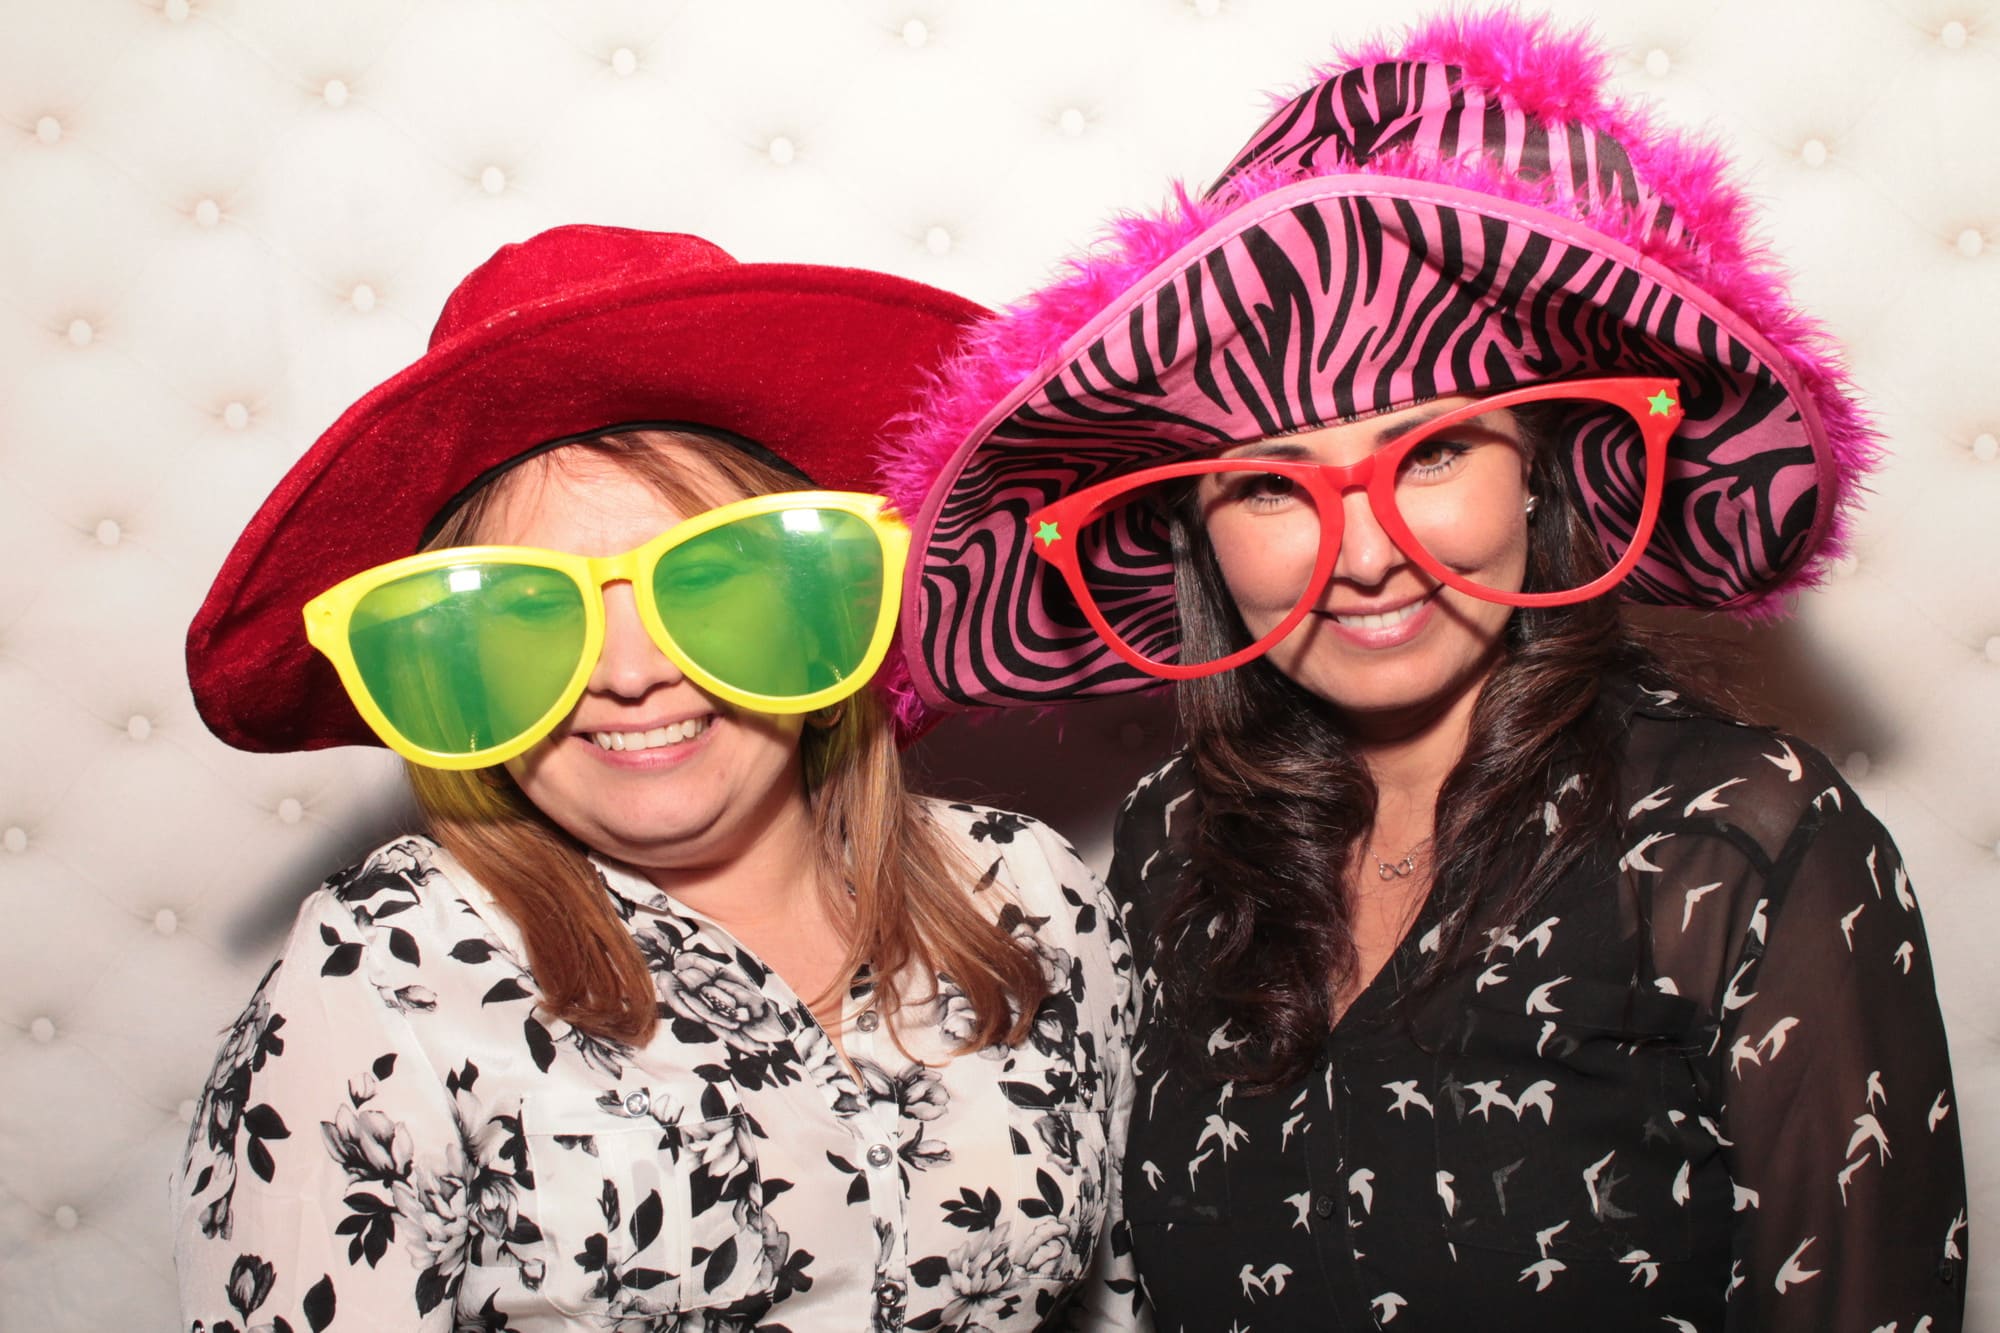 Photo Booth-Rental-Corporate-Conference-Hilton-No. 1-Props-Memories-Fun-Best